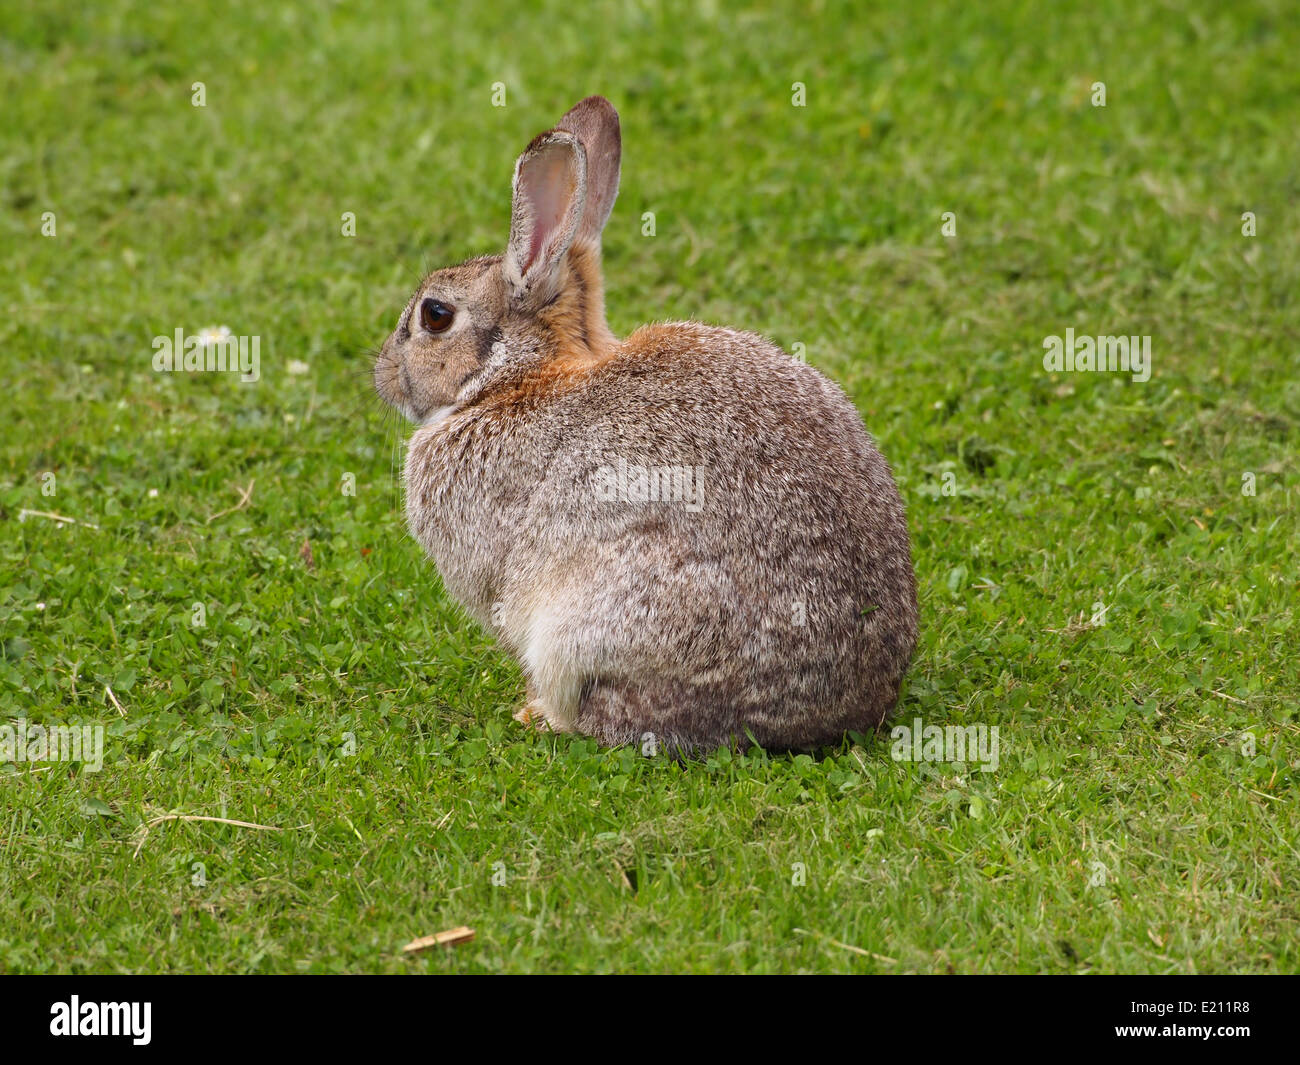 Rabbits in the wild on grass Stock Photo